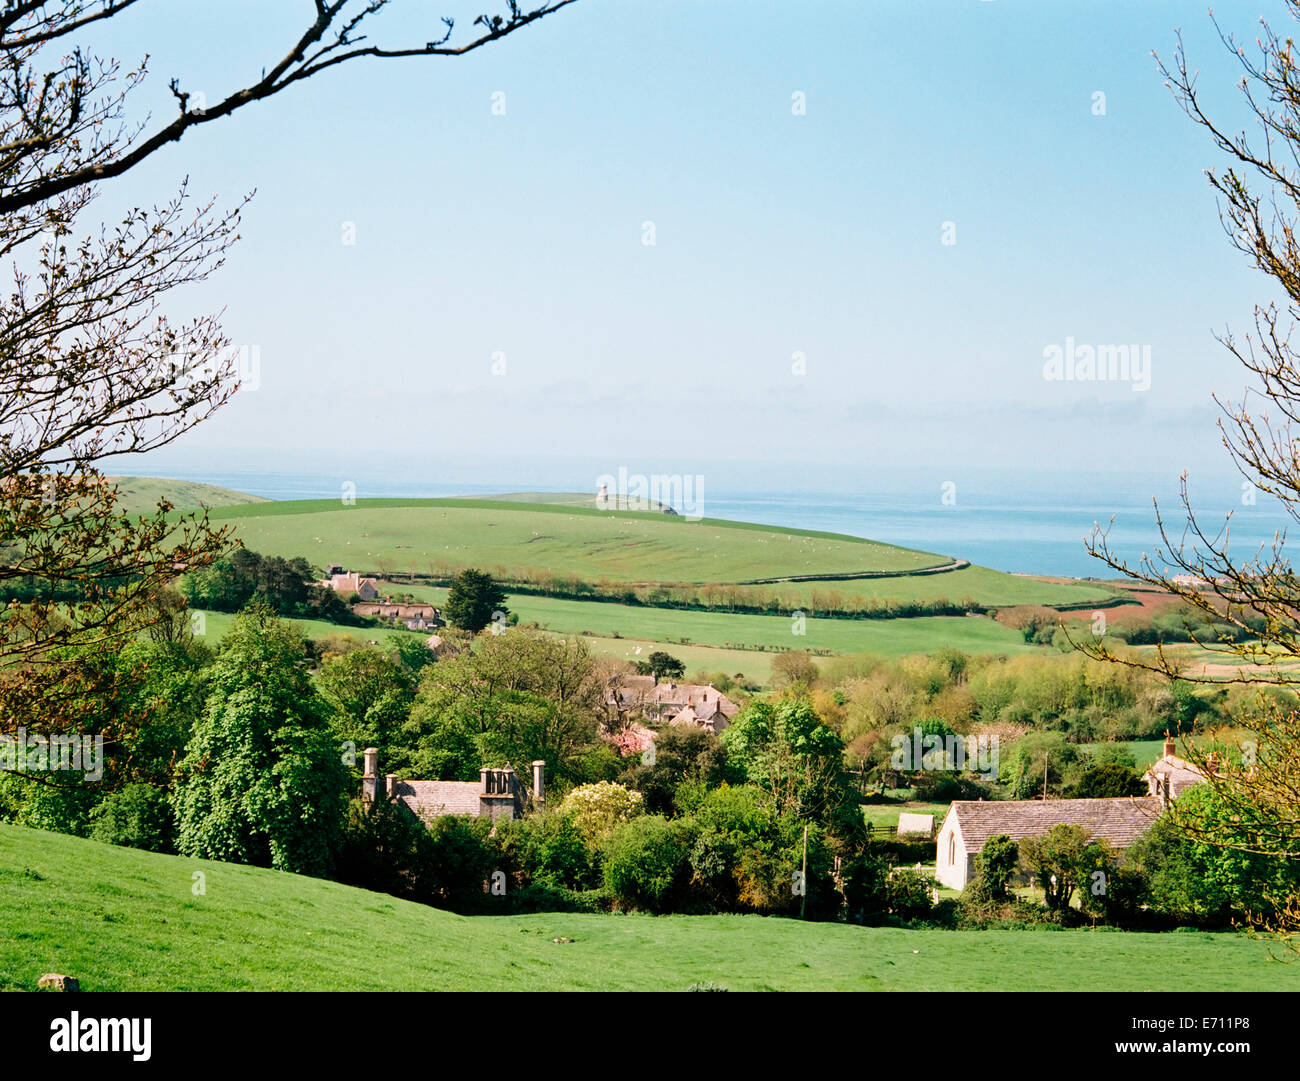 View from a hilltop over a village in the valley, looking out to sea from the coast. Stock Photo